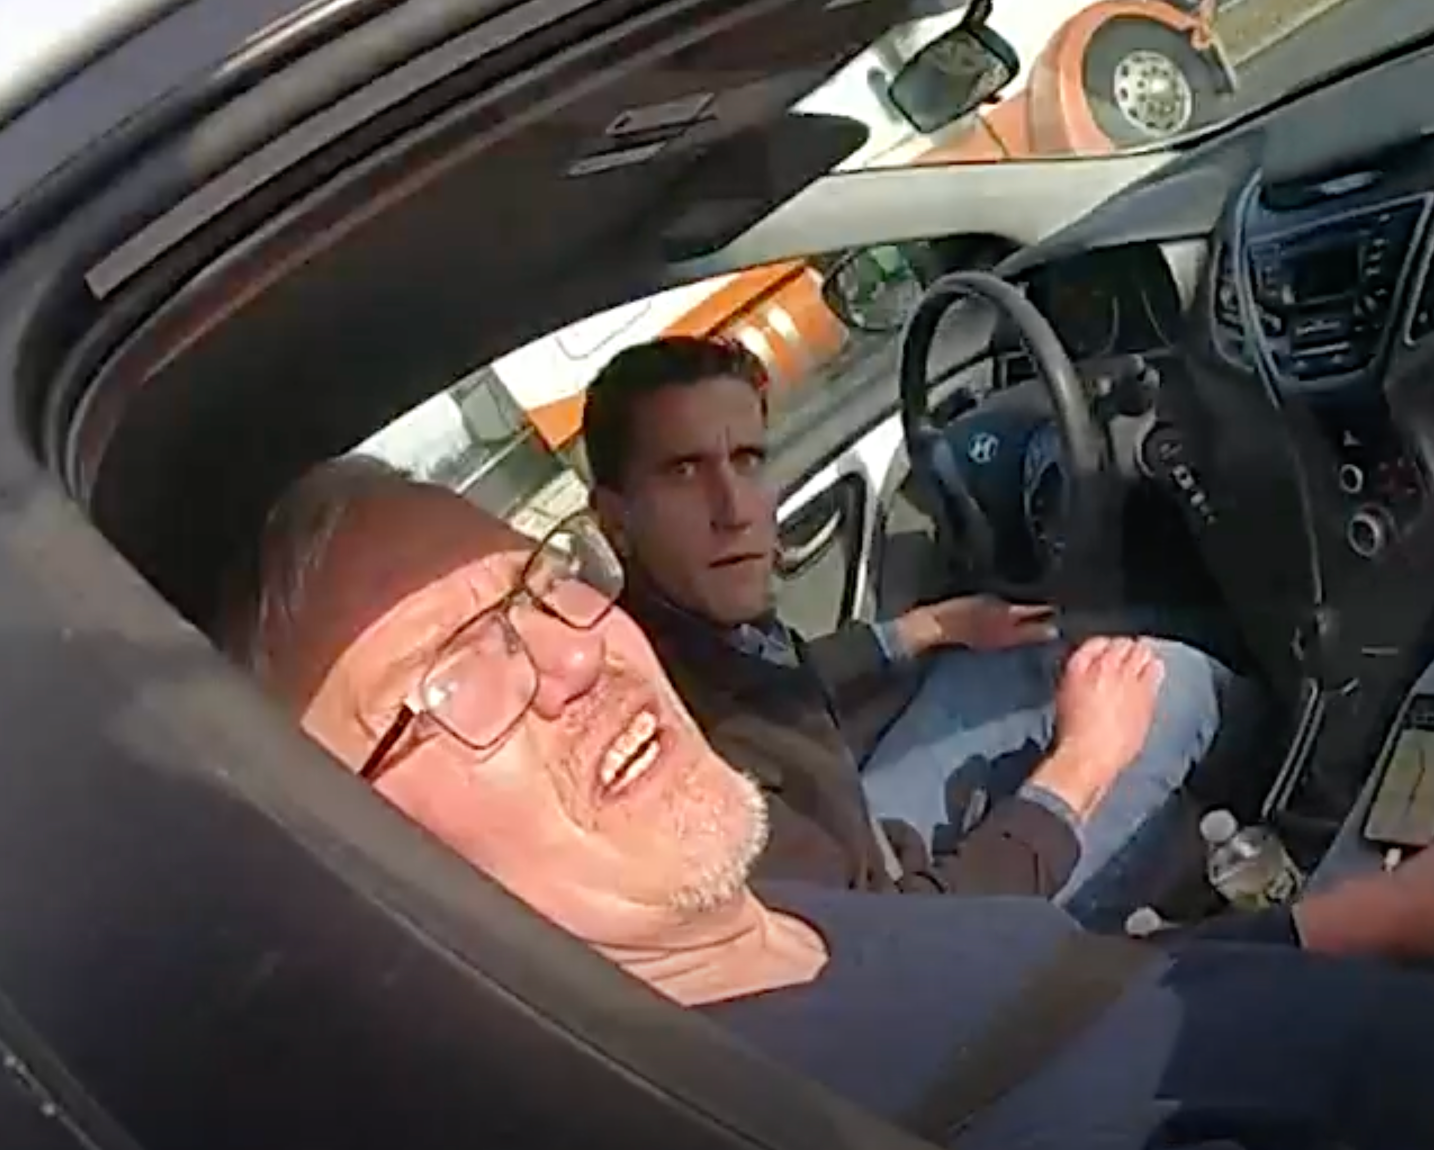 Bryan Kohberger and his father in bodycam footage after being pulled over by Indiana State Police on 15 December